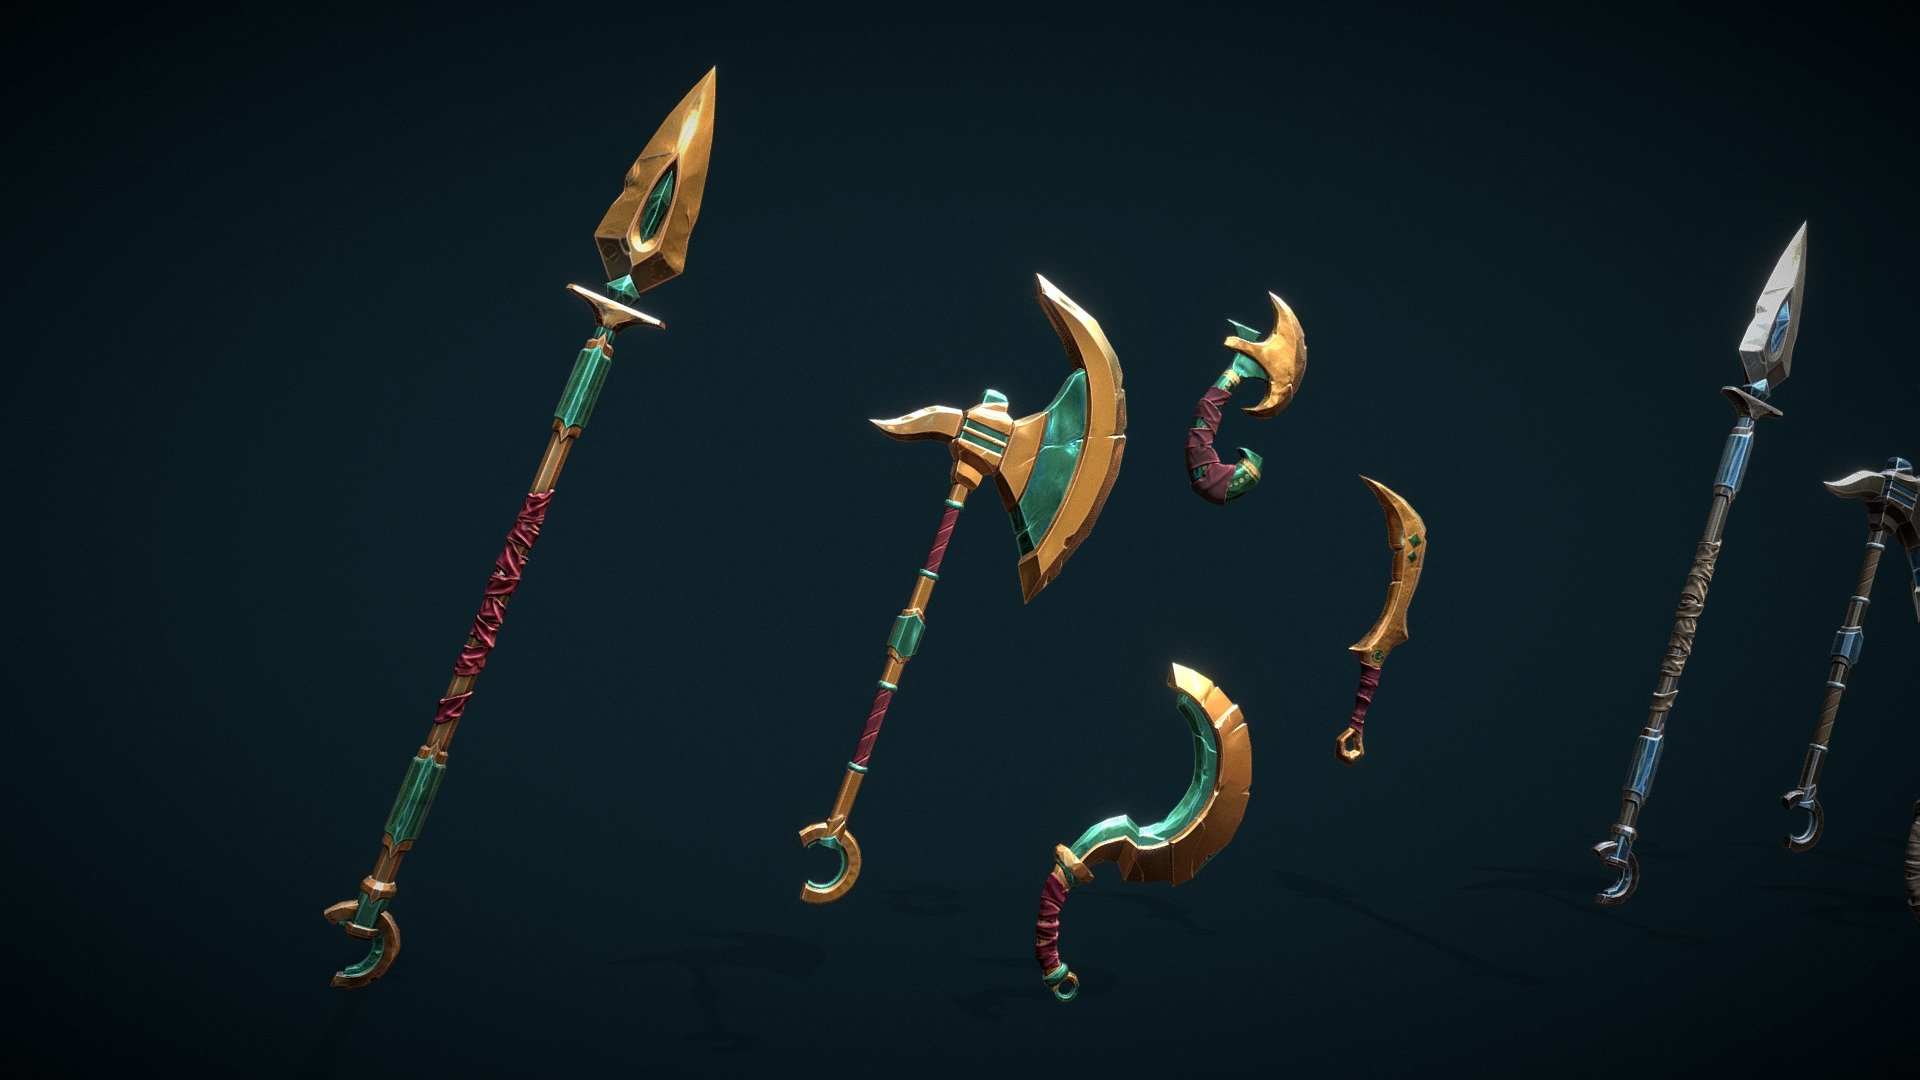 Weapon pack contains:

15 Weapons:

    5 Models:

        – Short Sword – 380 Tris;

        – One-Handed Axe – 2416 Tris;

        – Great Axe – 2024 Tris;

        – Spear – 4696 Tris;

        – Sickle – 1505 Tris;

    15 Different RGB Packed Materials:

        – 5 Desert Themed Materials – 2048×2048/ 1024×1024/ 512×512

        – 5 Vulcanic Themed Materials – 2048×2048/ 1024×1024/ 512×512

        – 5 Nordic Themed Materials – 2048×2048/ 1024×1024/ 512×512

Get 5 Game Ready Stylized Assets that can be used in any type of game. Anything from Phone Games to Stylized RPGs, top-down Hack, and Slash, and even Brawlers and Strategy games. We offer Variety and most importantly Quality so you don’t have to think about the asset-making process anymore 3d model